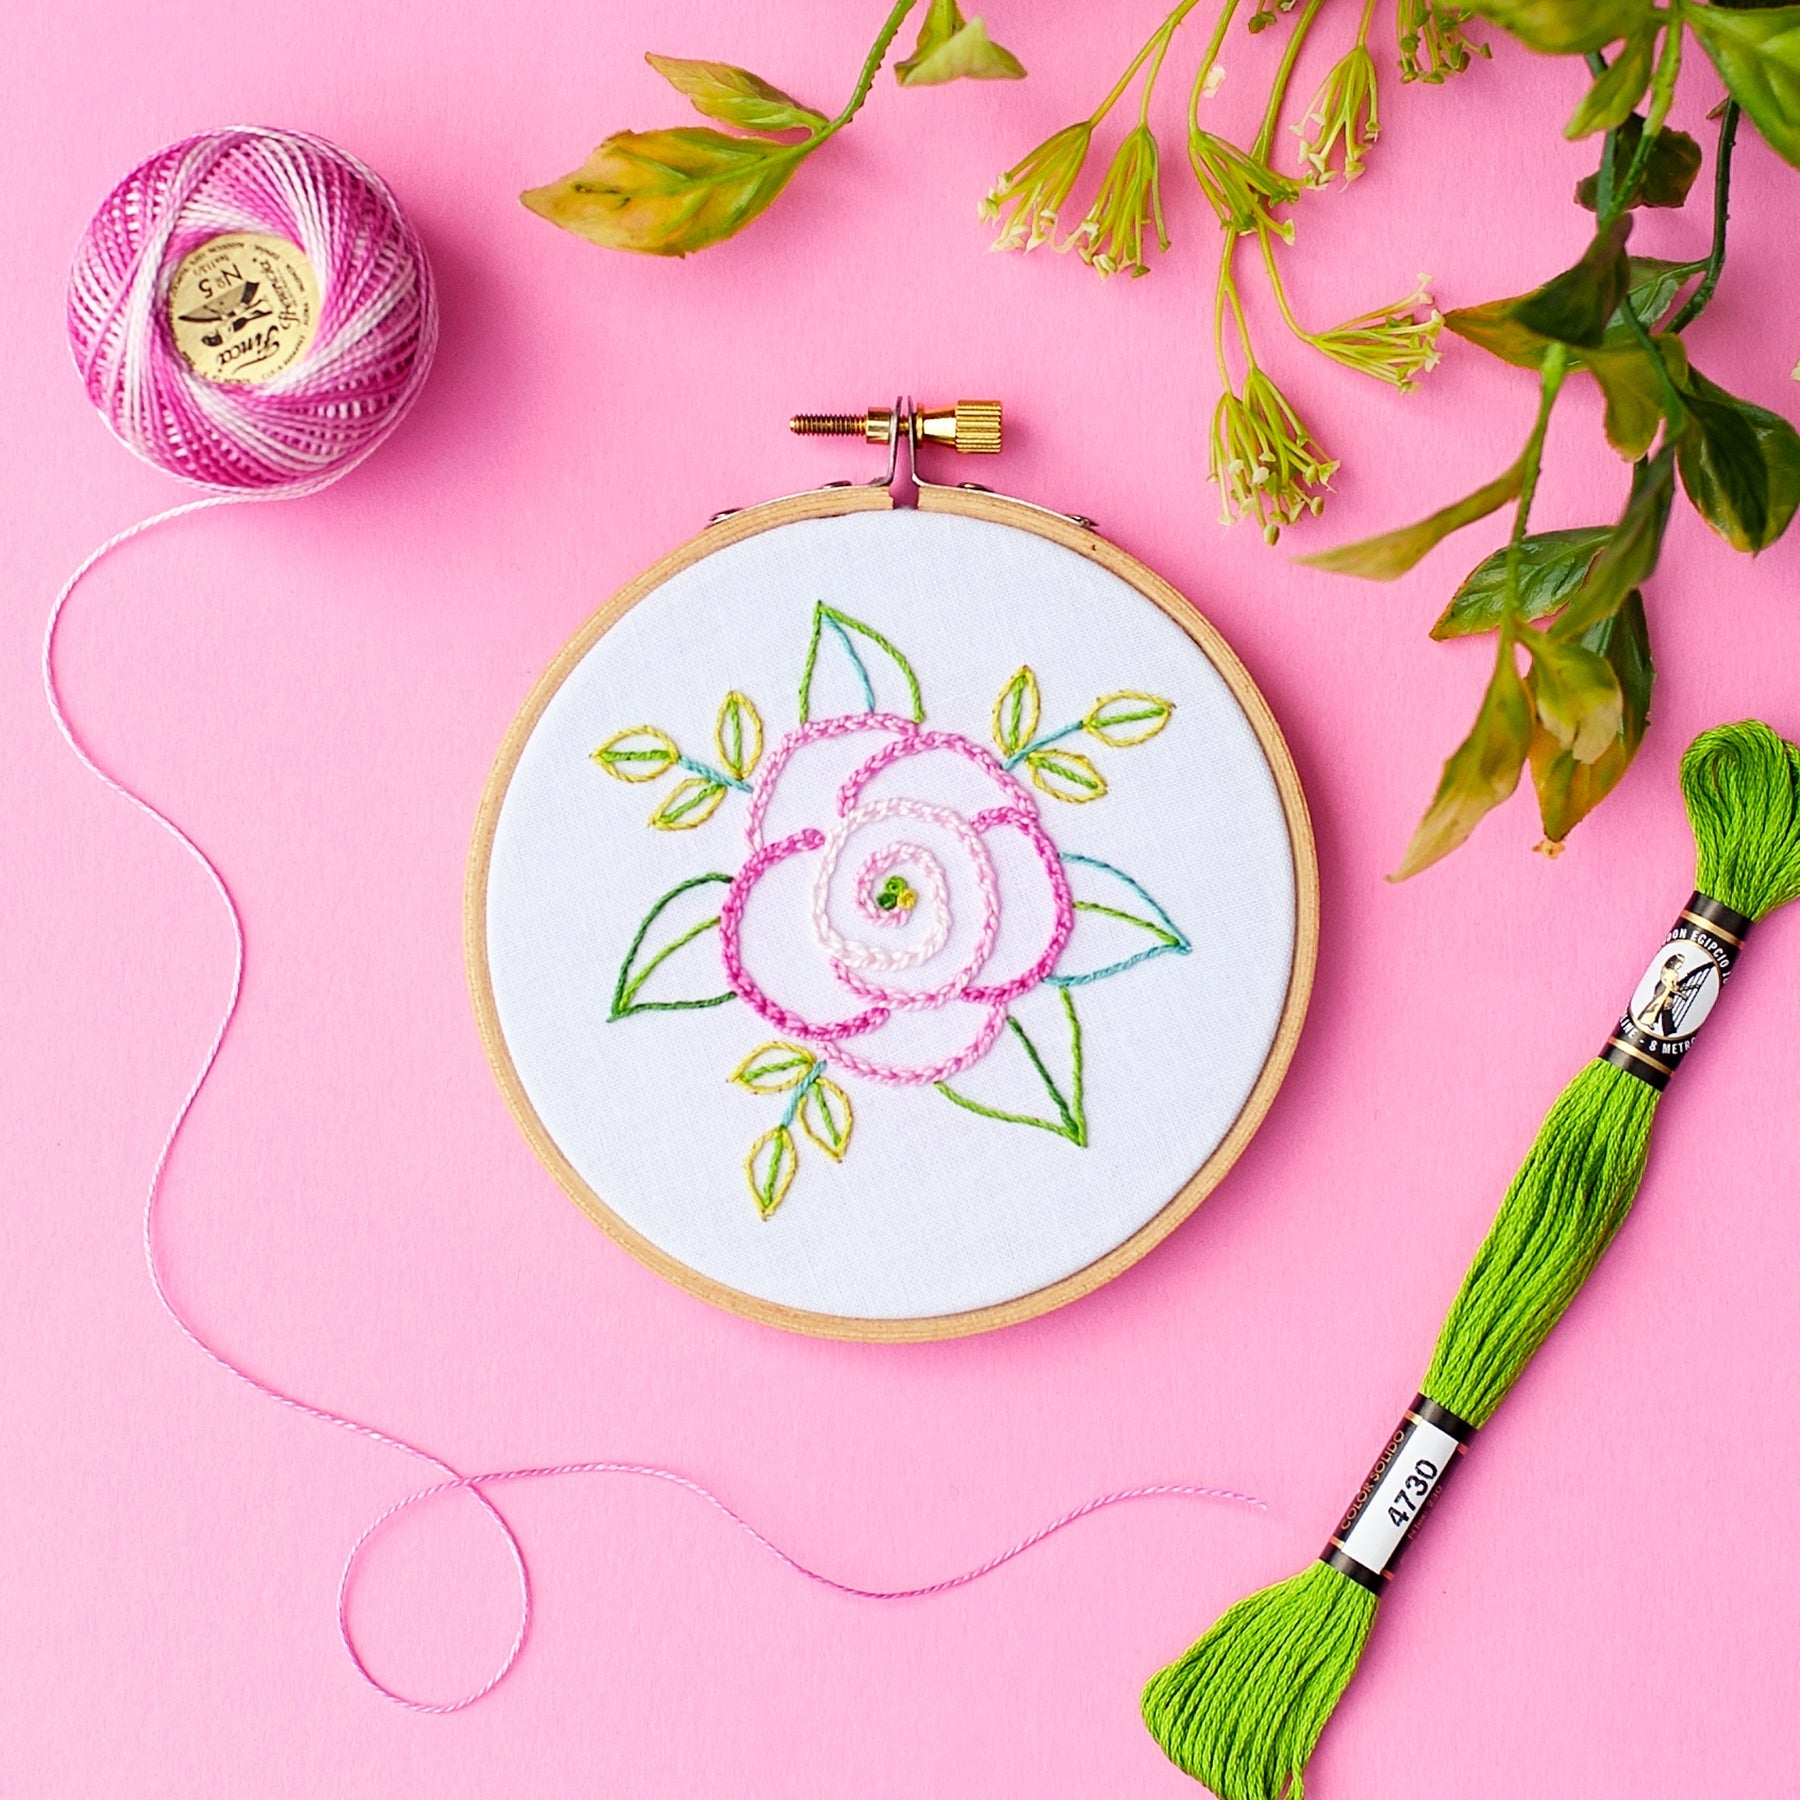 Summer Rose Embroidery Kit